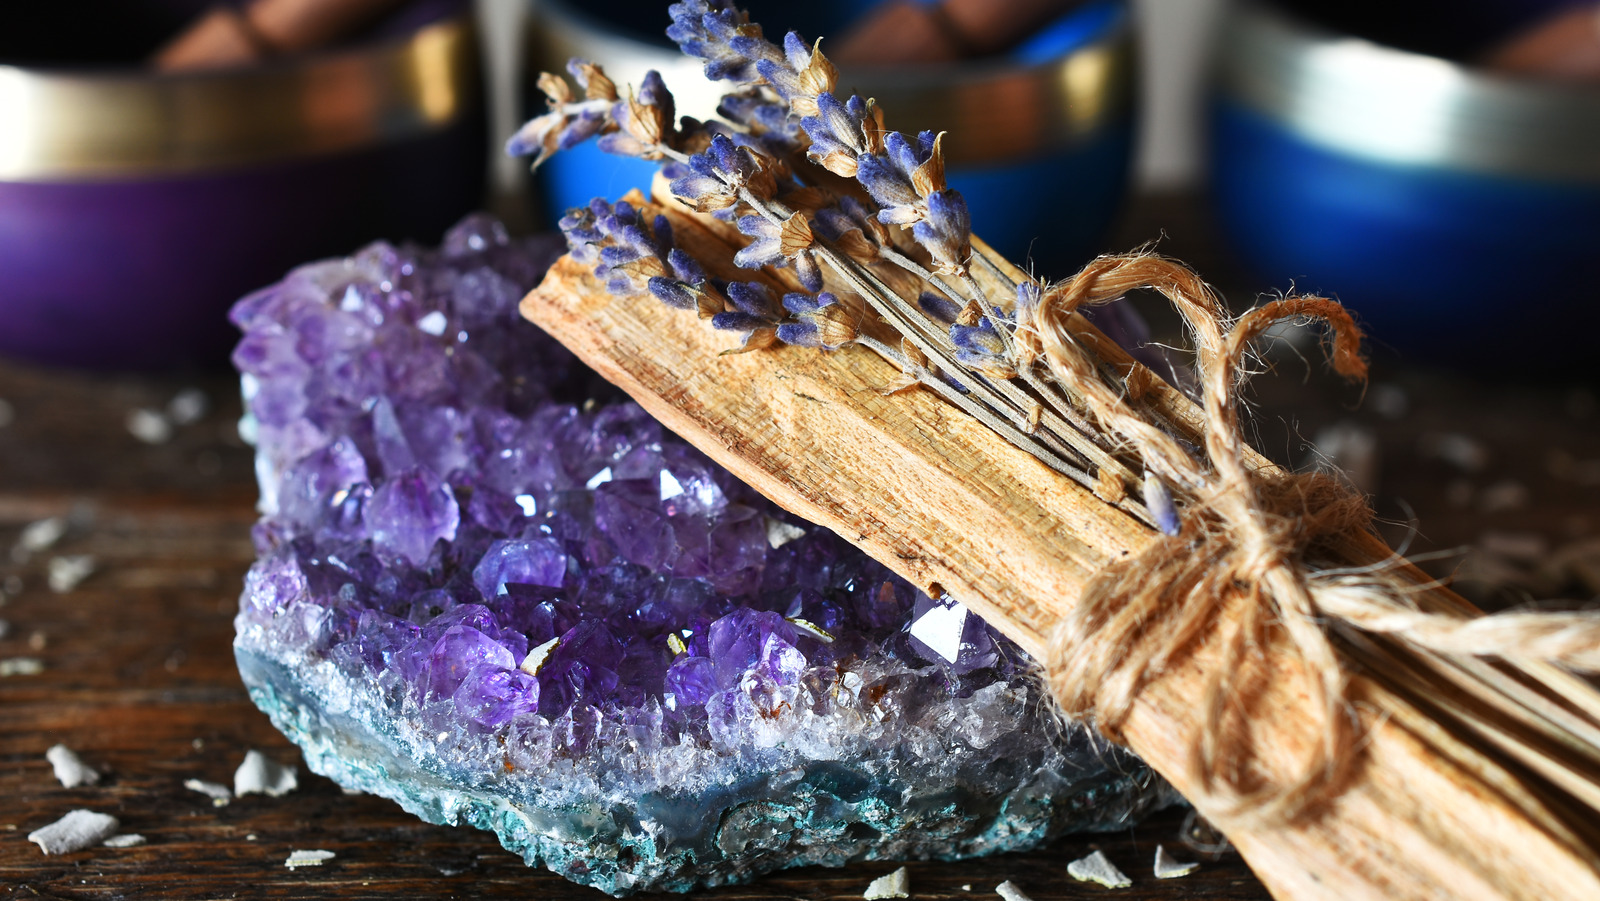 https://www.glam.com/img/gallery/how-to-tap-into-the-healing-powers-of-amethyst-crystals/l-intro-1675344033.jpg